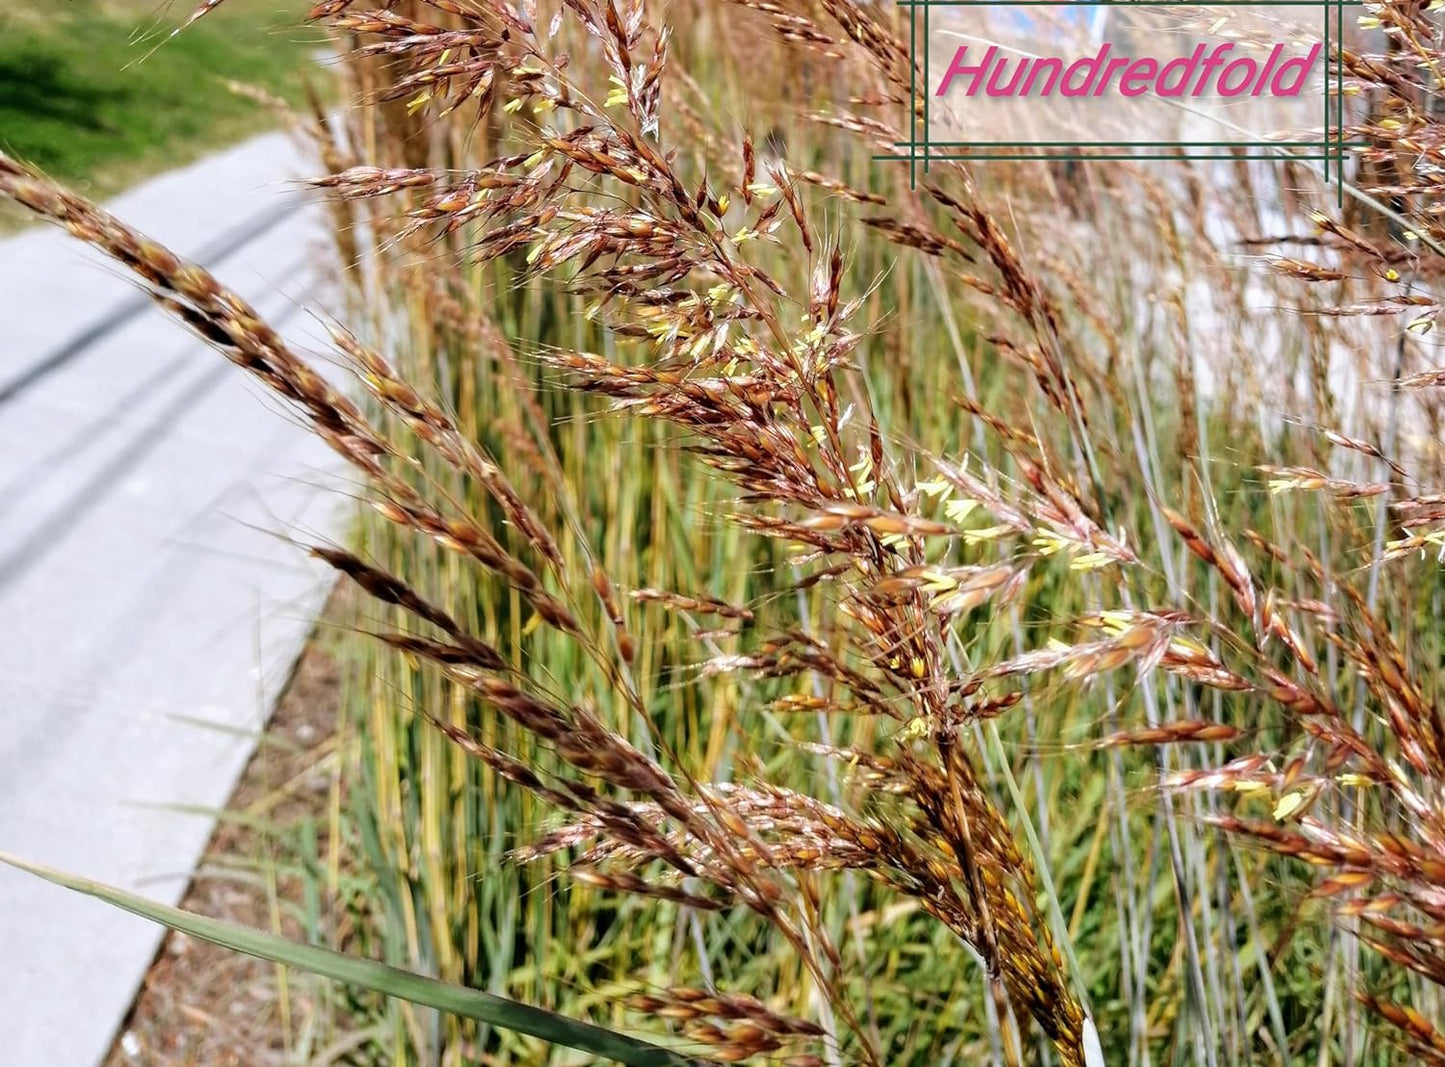 Hundredfold 500 Indiangrass Seeds - Sorghastrum nutans Indian Grass Ornamental Bunch Grasses, Yellow Indiangrass, Attract Birds, Valued for Native Garden & Wildflower Meadow